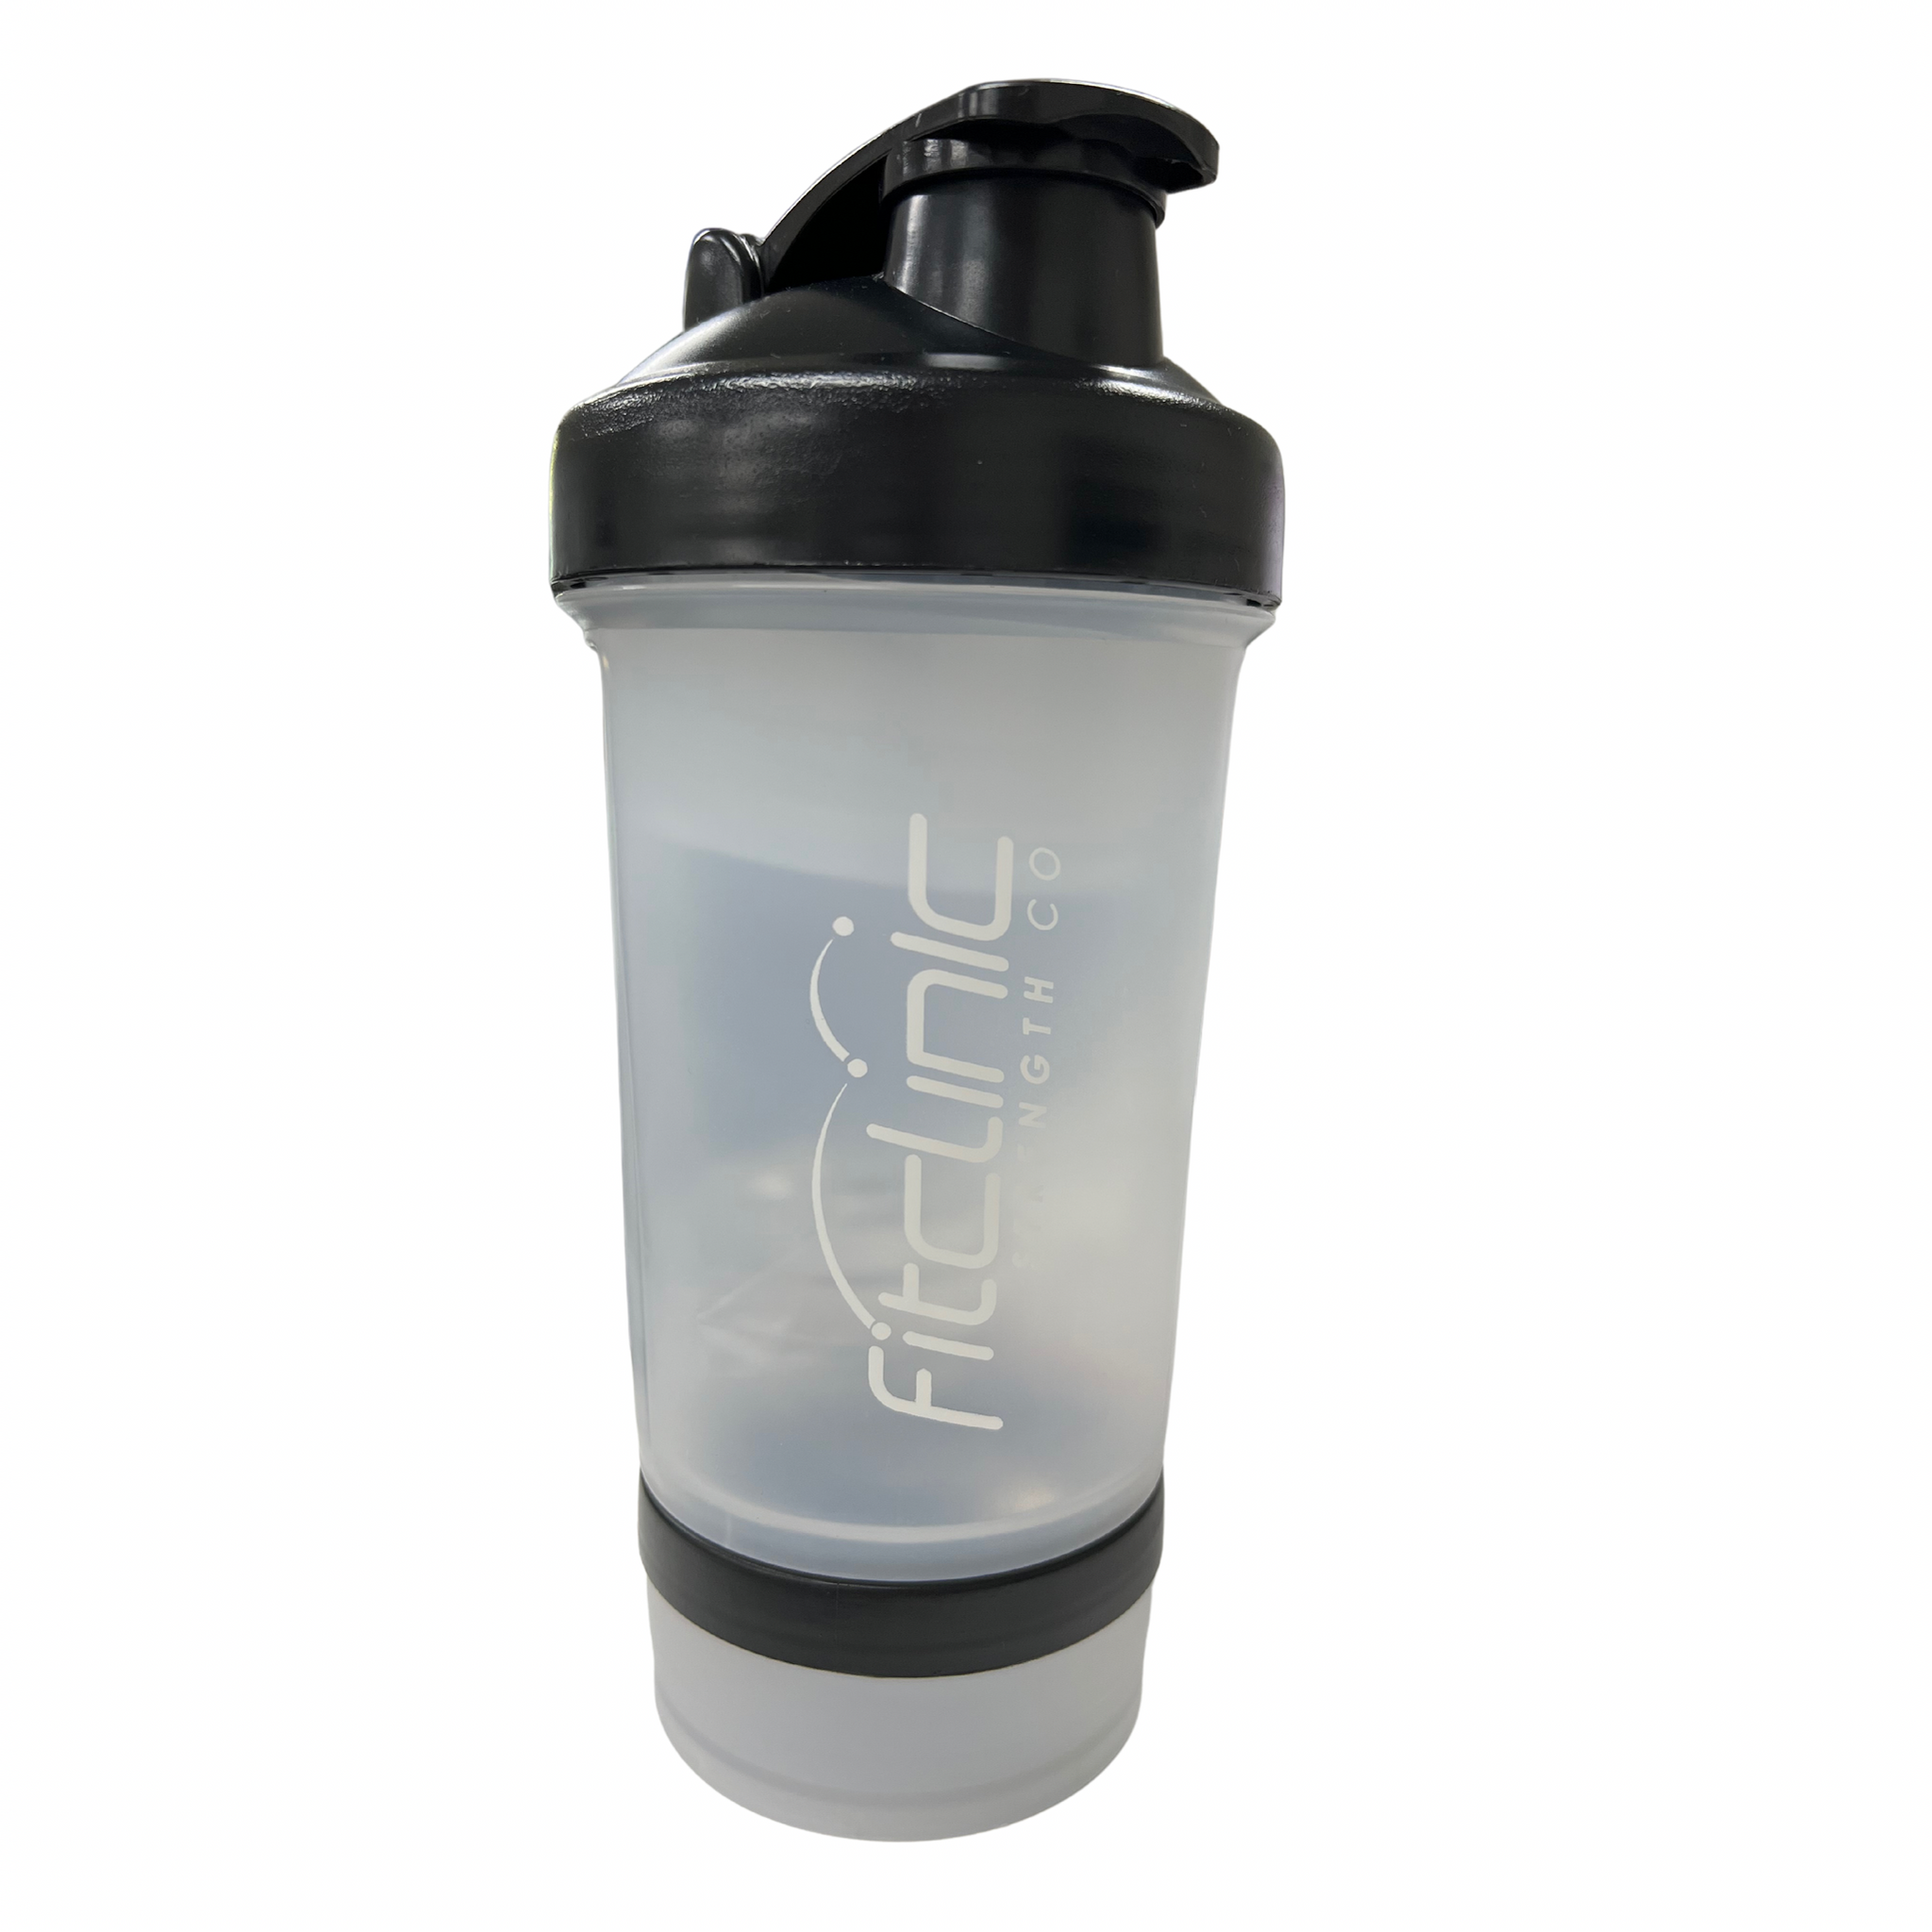 Protein Shaker/Water bottle with storage